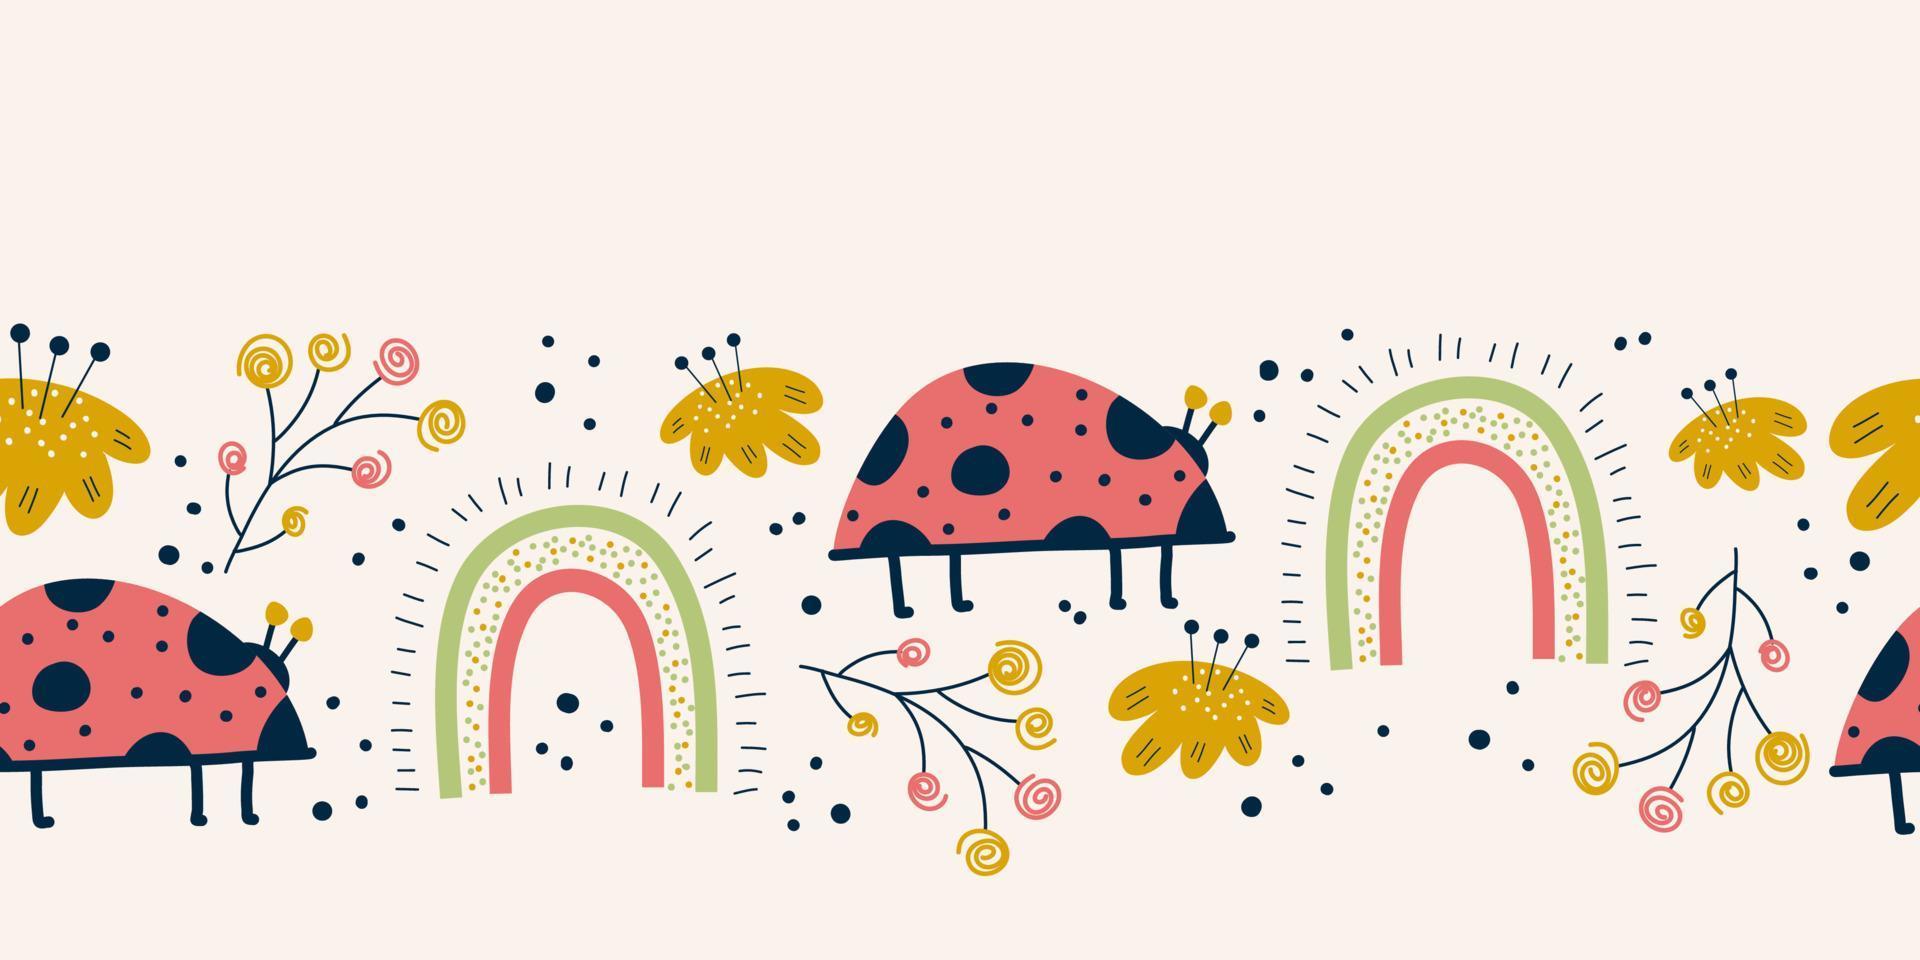 Seamless border with ladybug, rainbow and flower, pink background. Scandinvian Spring design. Insect ladybird with flowers and branches simple summer seamless printFlat Vector illustration